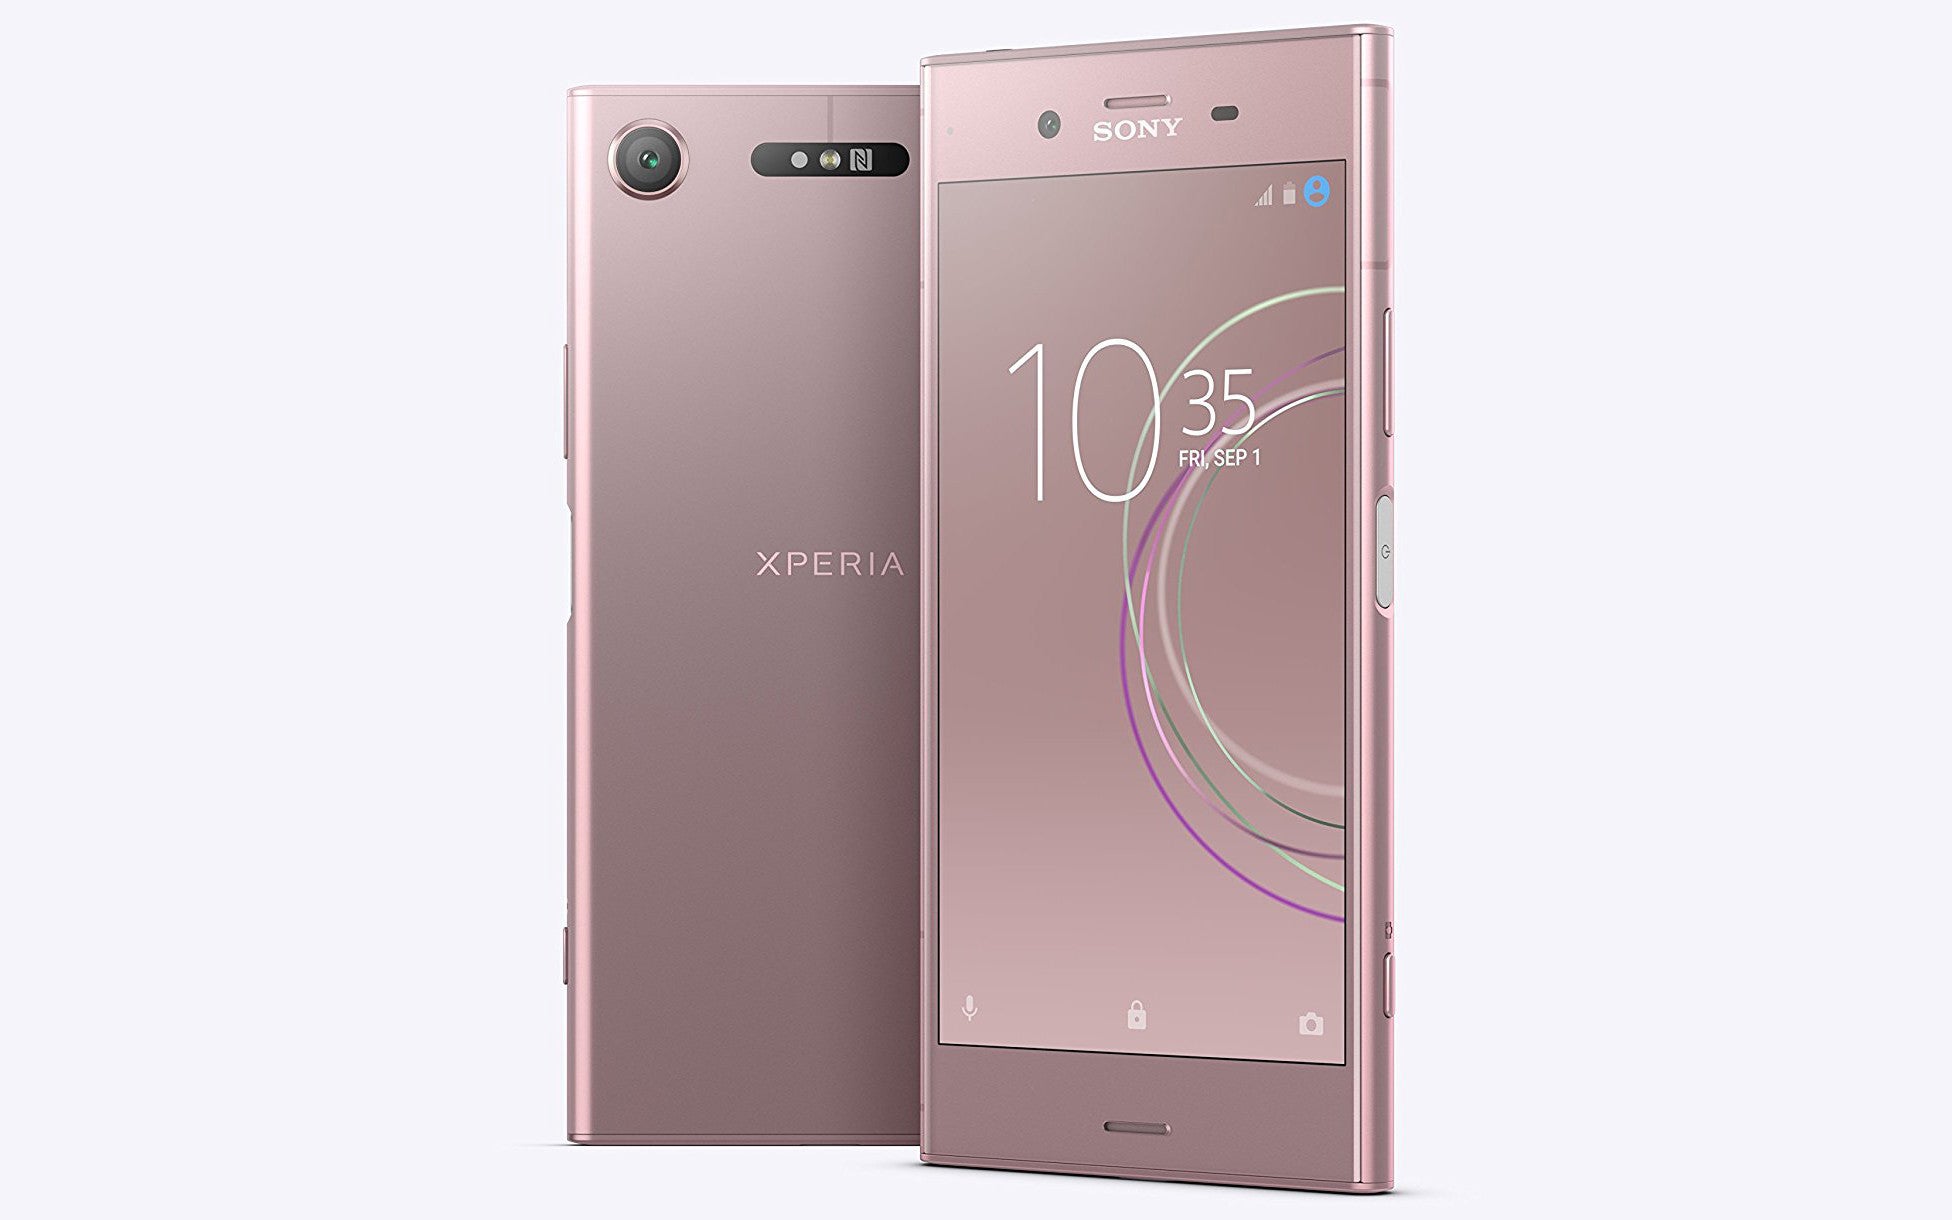 Sony Xperia XZ1 official renders emerge, show off a cool new color option